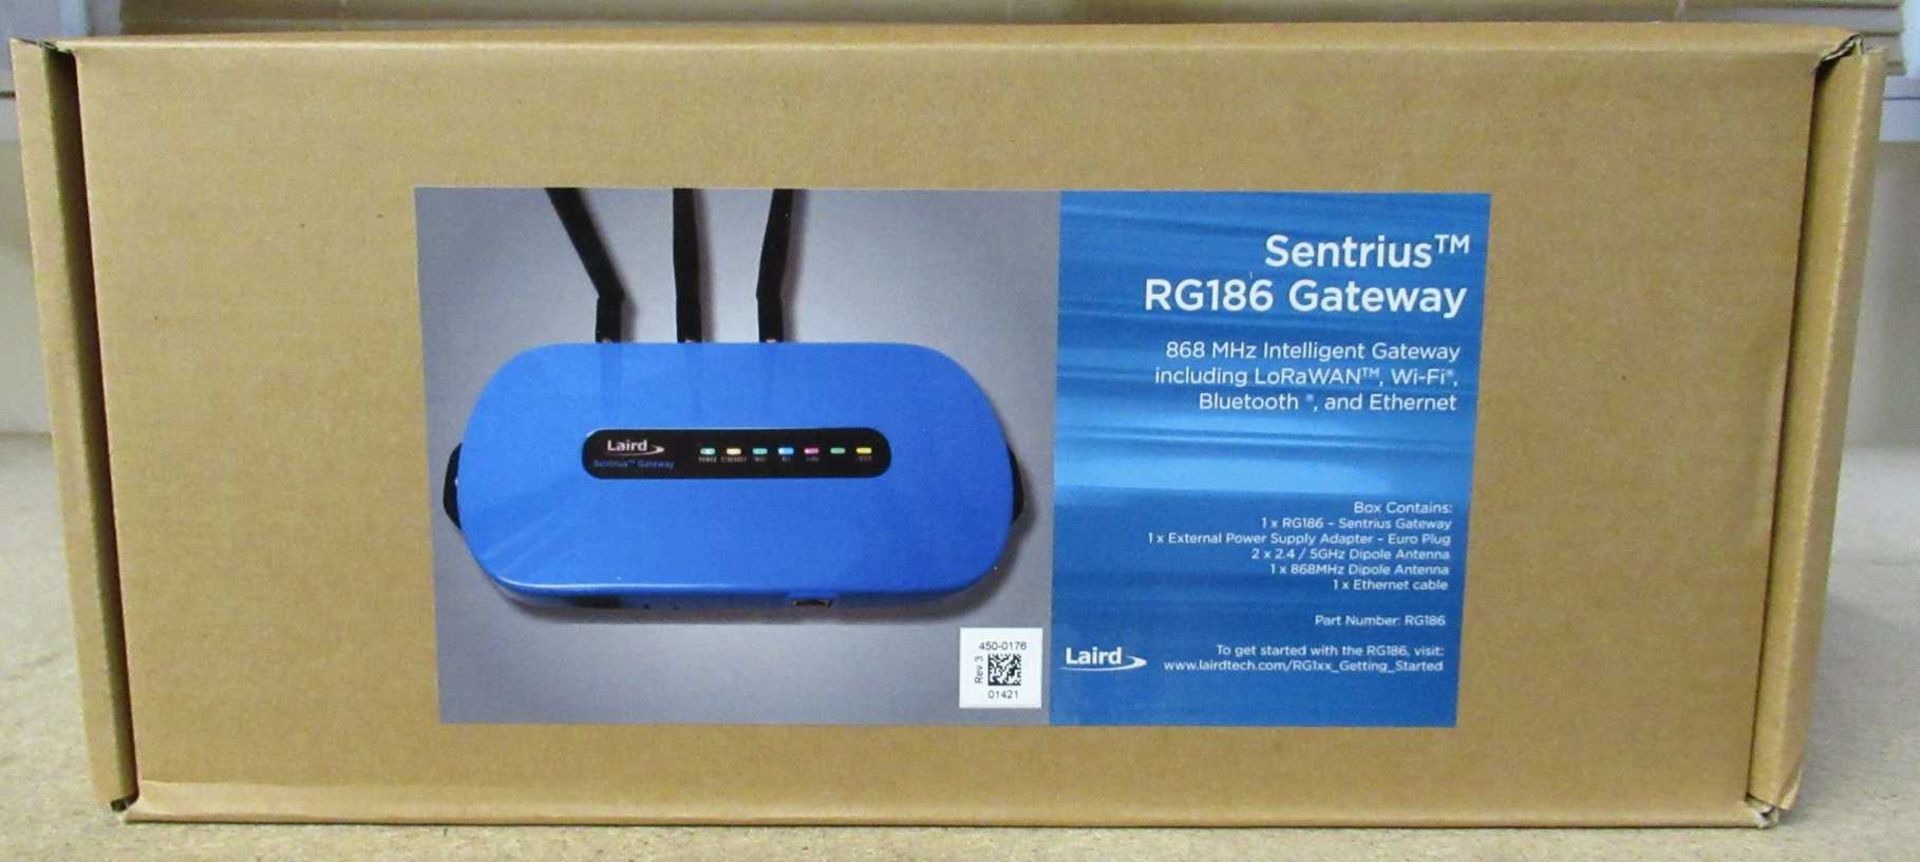 A boxed as new Laird Sentrius RG186 868MHz Intelligent Gateway including LoRaWAN, WiFi, Bluetooth